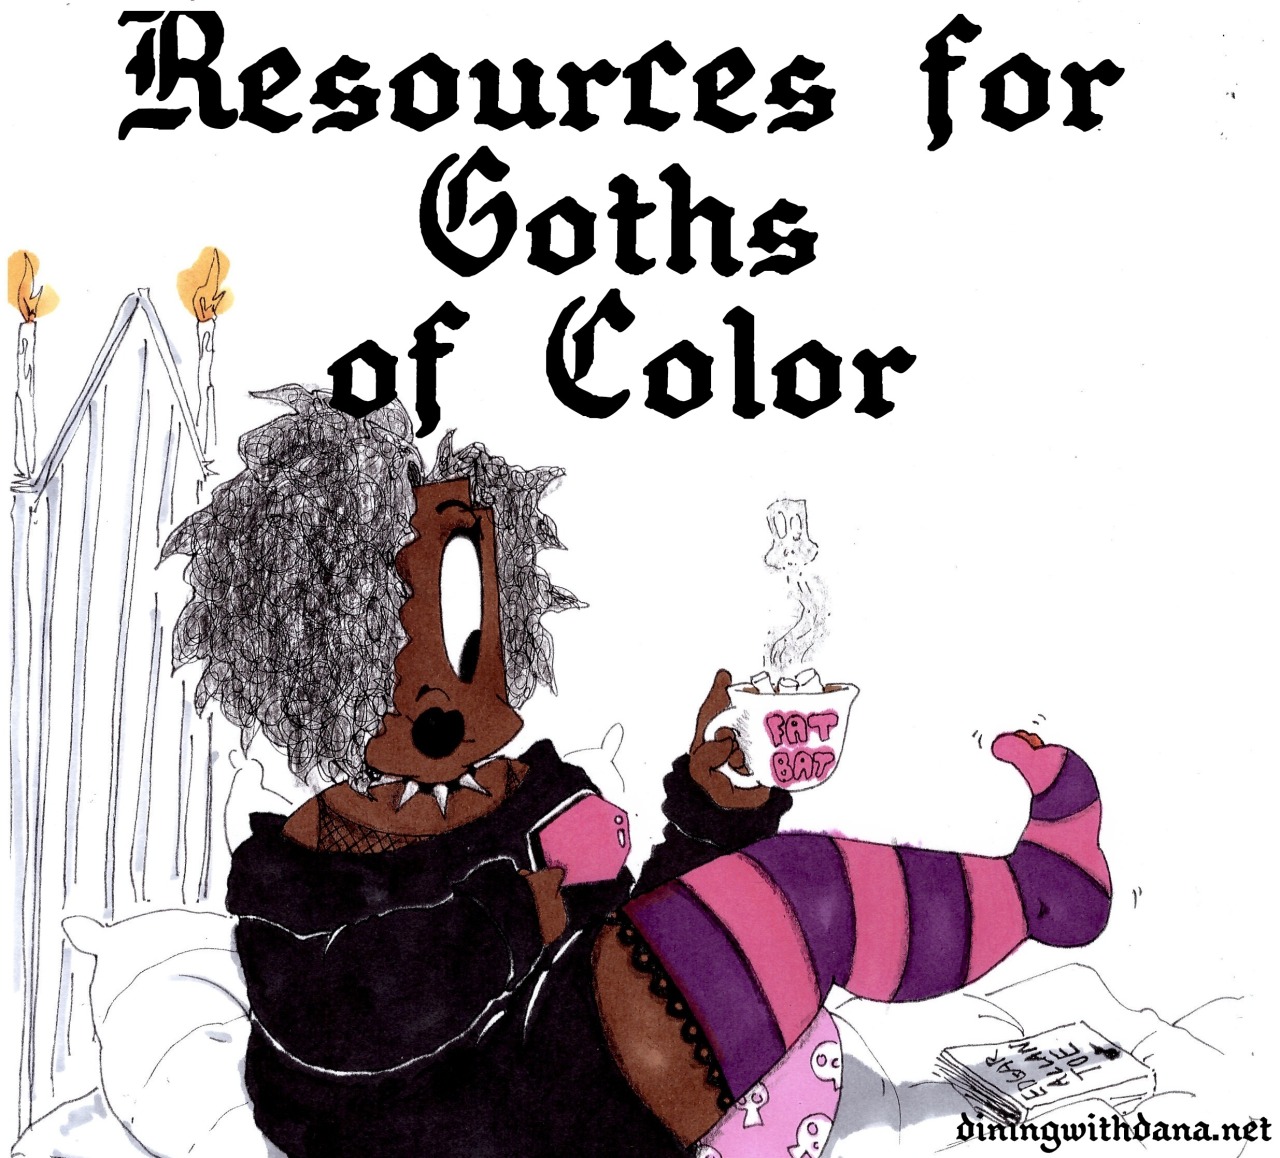 Resources for Goths of Color minipost
Hey Big Bats!
This blog is a resource for all and any backgrounds - even for you, immaterial sentient being. However, you might be like me and considered a wink non-traditional. So, I thought I would share some of my favorite links for the freaks among freaks:
Afropunk in all its glory.
gothiccharmschool on Goths of Color.
POCs in Goth/Punk/Alternative music Masterpost for a long list of bands.
&#8220;I am so goth I was born black&#8221; inspirational article on Coilhouse.
Black/African American Goths group on Facebook.
Color Me Goth no longer active, but this was a fab blog about a Goth of Color.
Beijing Punk documentary on Beijing&#8217;s underground scene during the year of the Olympics.
Goths of Color article on Morbid Outlook.
Goth.net Middle East/Russia/Europe forums.
Metal Archives - browse by country which covers a multitude of areas.
Goths of Color Beauty Tips guest post on Stripy Tights and Dark Delights.
Being a Black Goth&#8230;the Conundrum on Mooky Chick.
Blogs:
blacksheepgoths covers multiple ethnicities and underrepresented alternative folk.
proletariangothic collects images of underrepresented punks.
iamsogothiwasbornblack afro Goth blog.
darqueandlovely alternative multicultural images.
F*ck Yeah Black Goths images of black goths.
Most of the blogs cover a range of cultures, but I would love to hear your story as - or your experience with - a Goth of Color! Also, what are some of your favorite links?